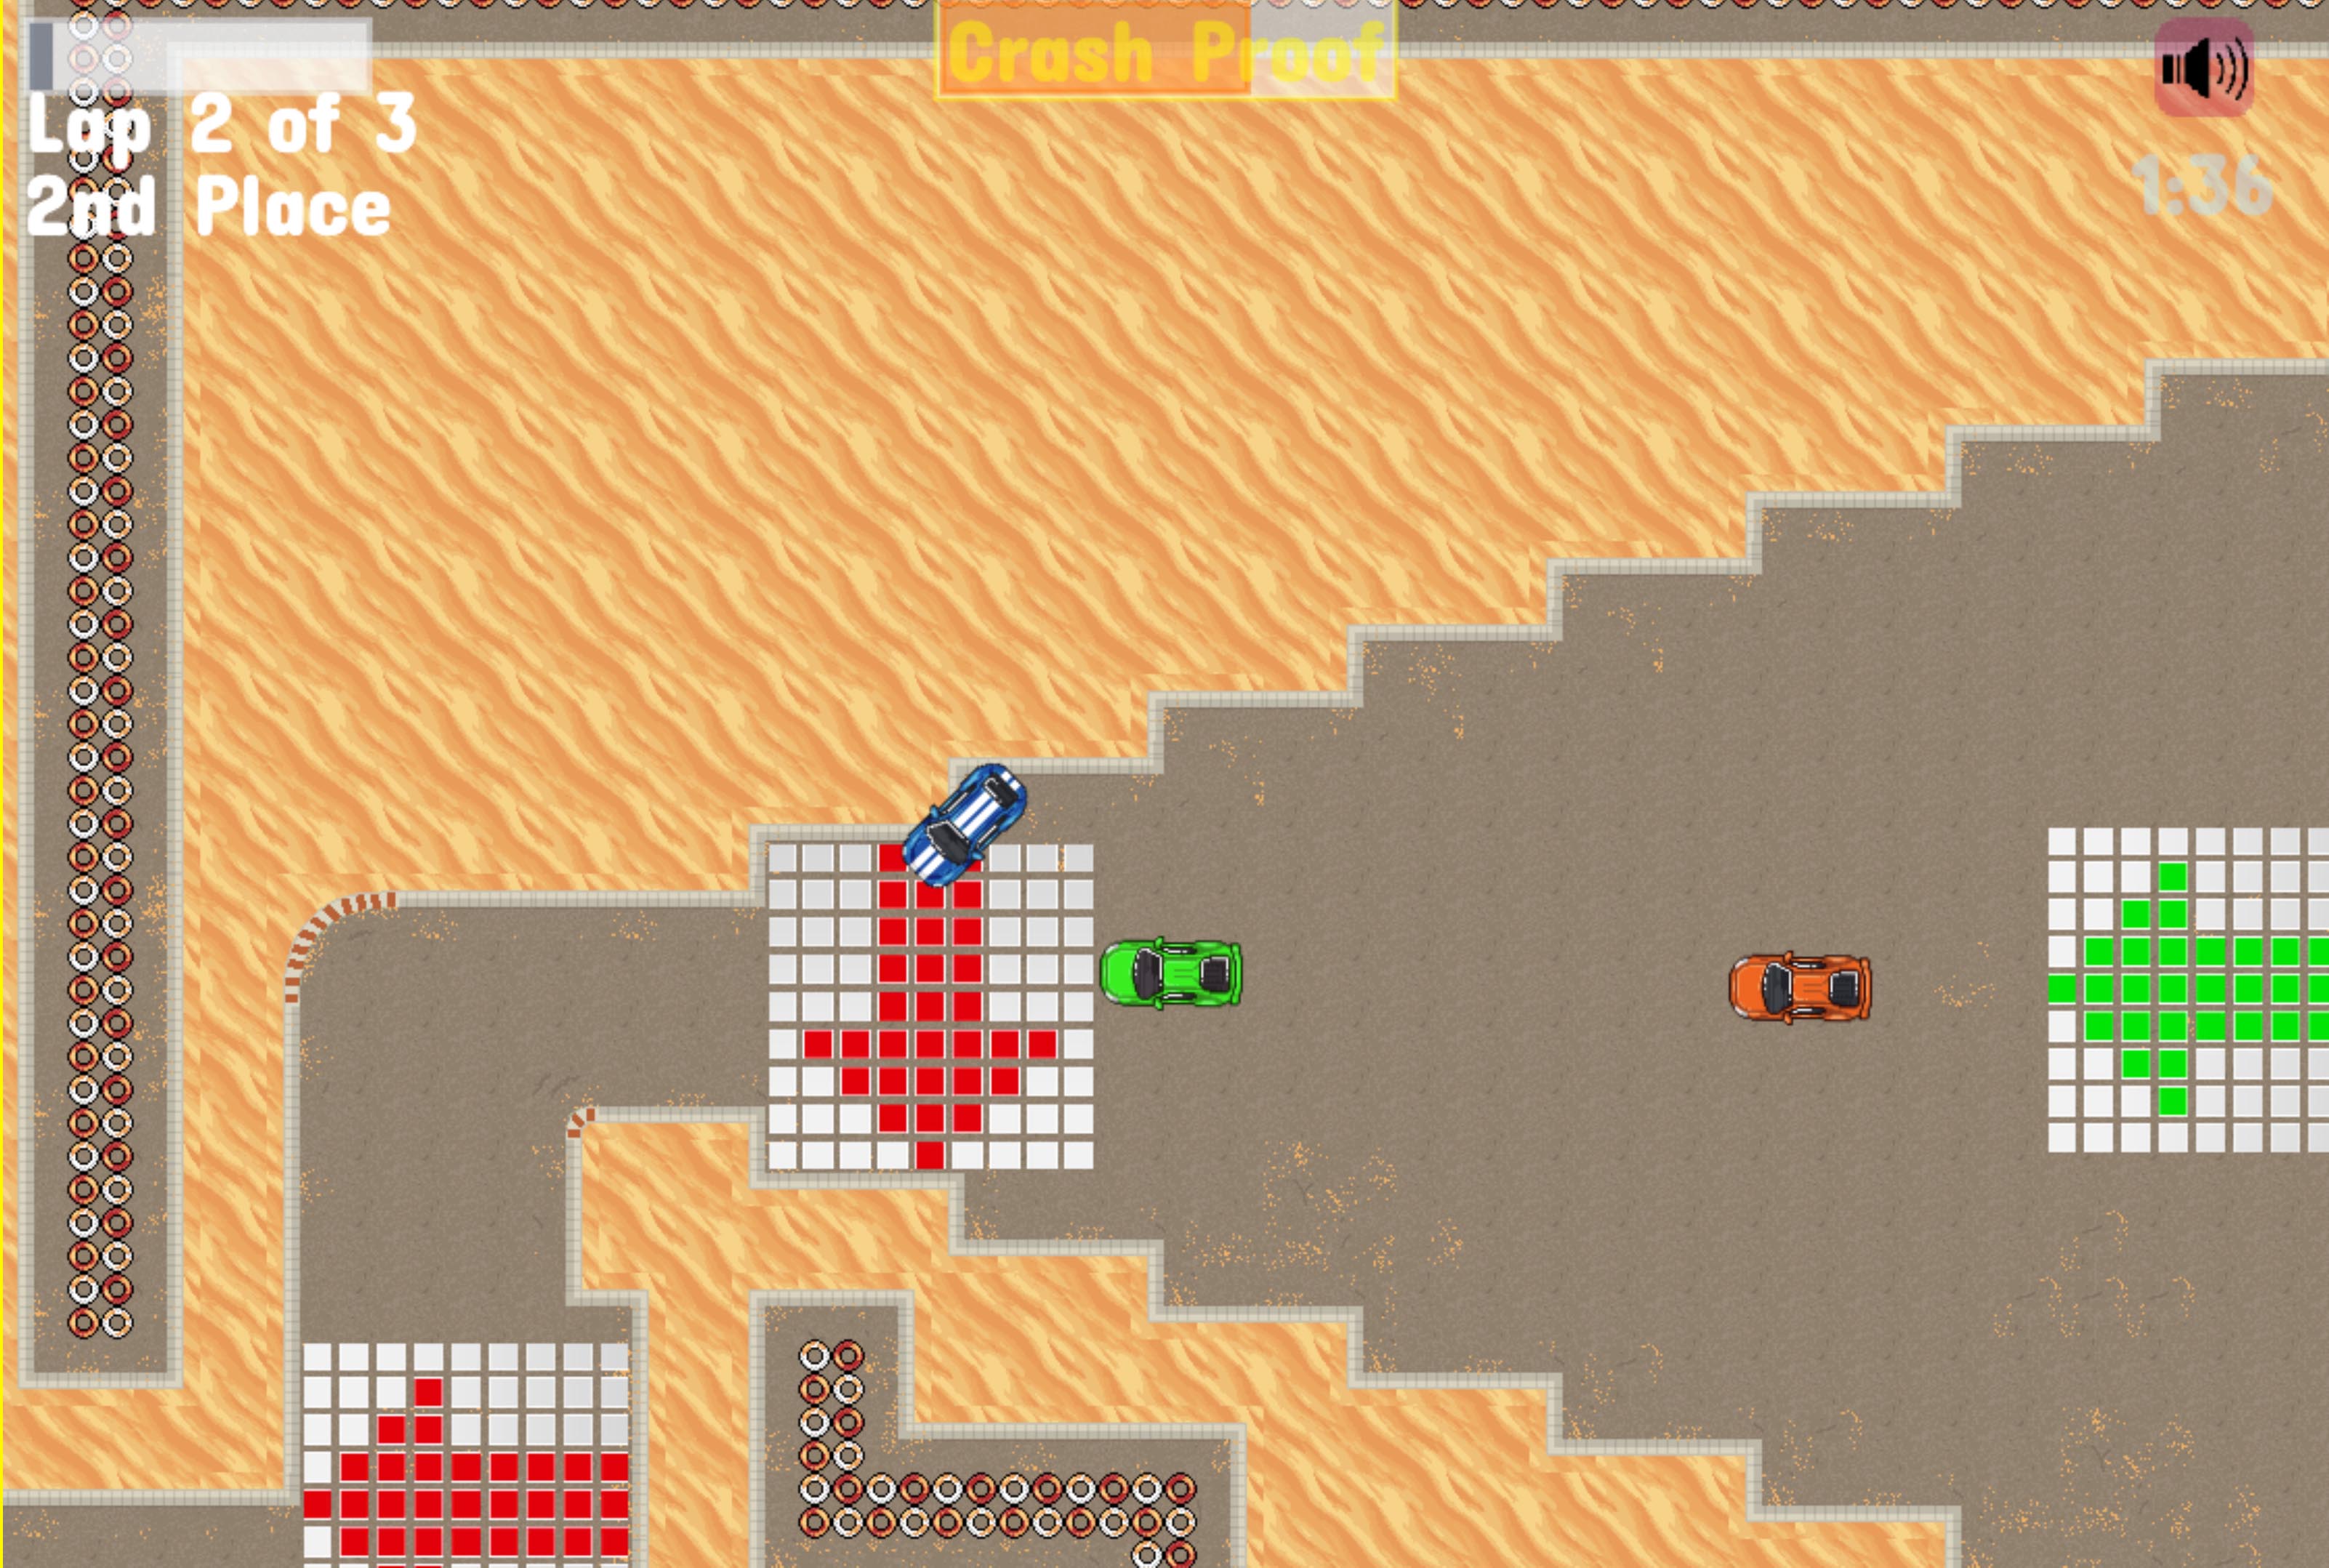 This is a screenshot from Conflict Cars. The player is blue race car on a desert track.